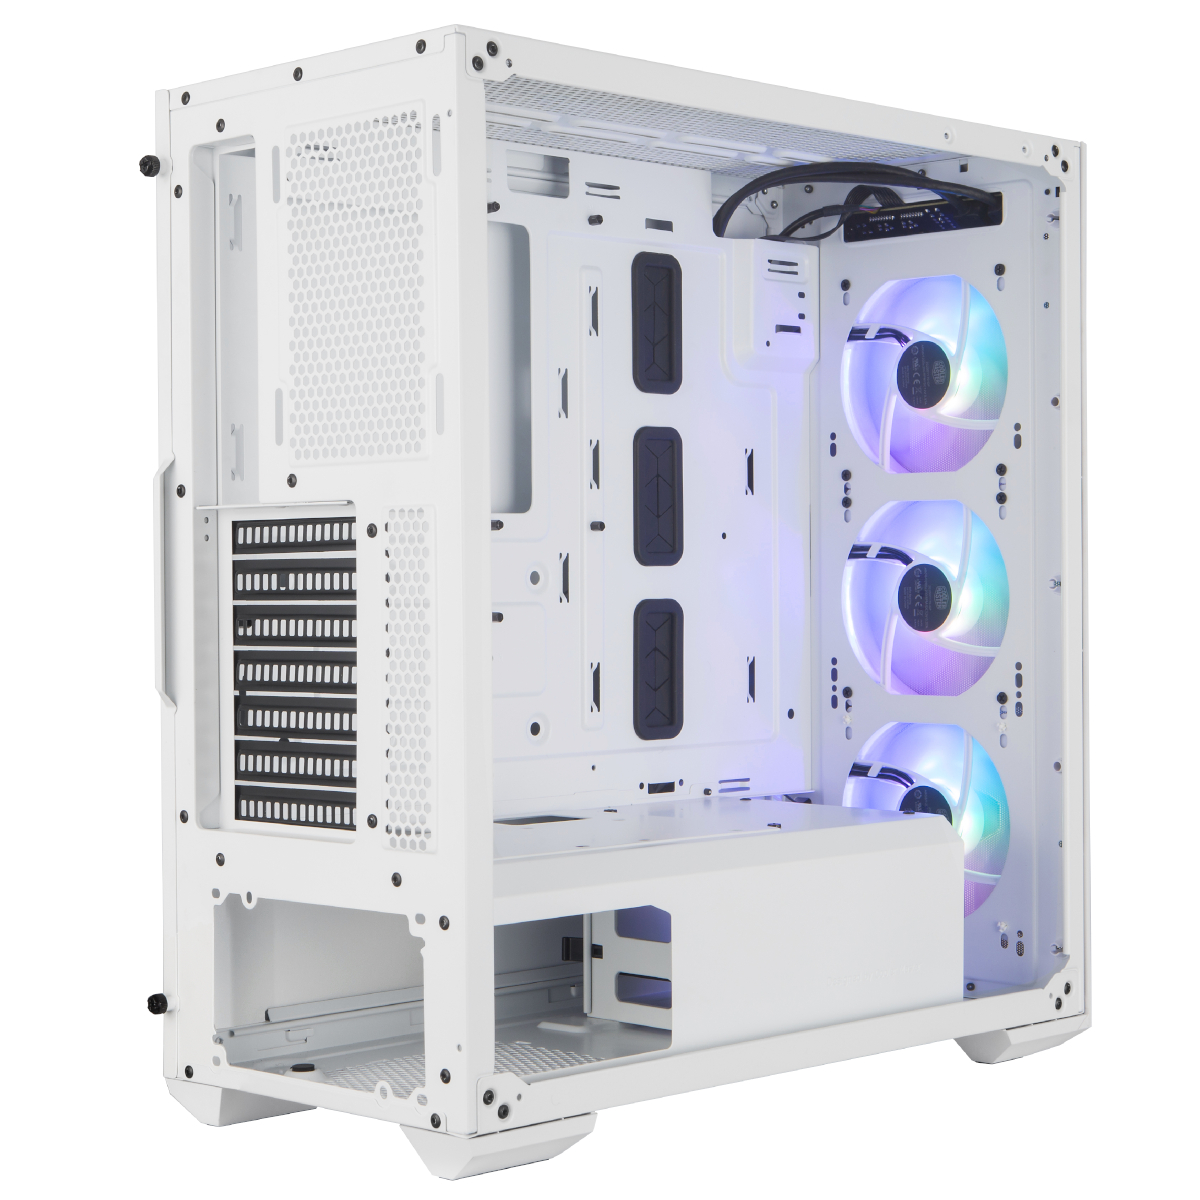 Cooler Master - CoolerMaster MasterBox TD500 Mesh Mid-Tower E-ATX Case - White Tempered Gla